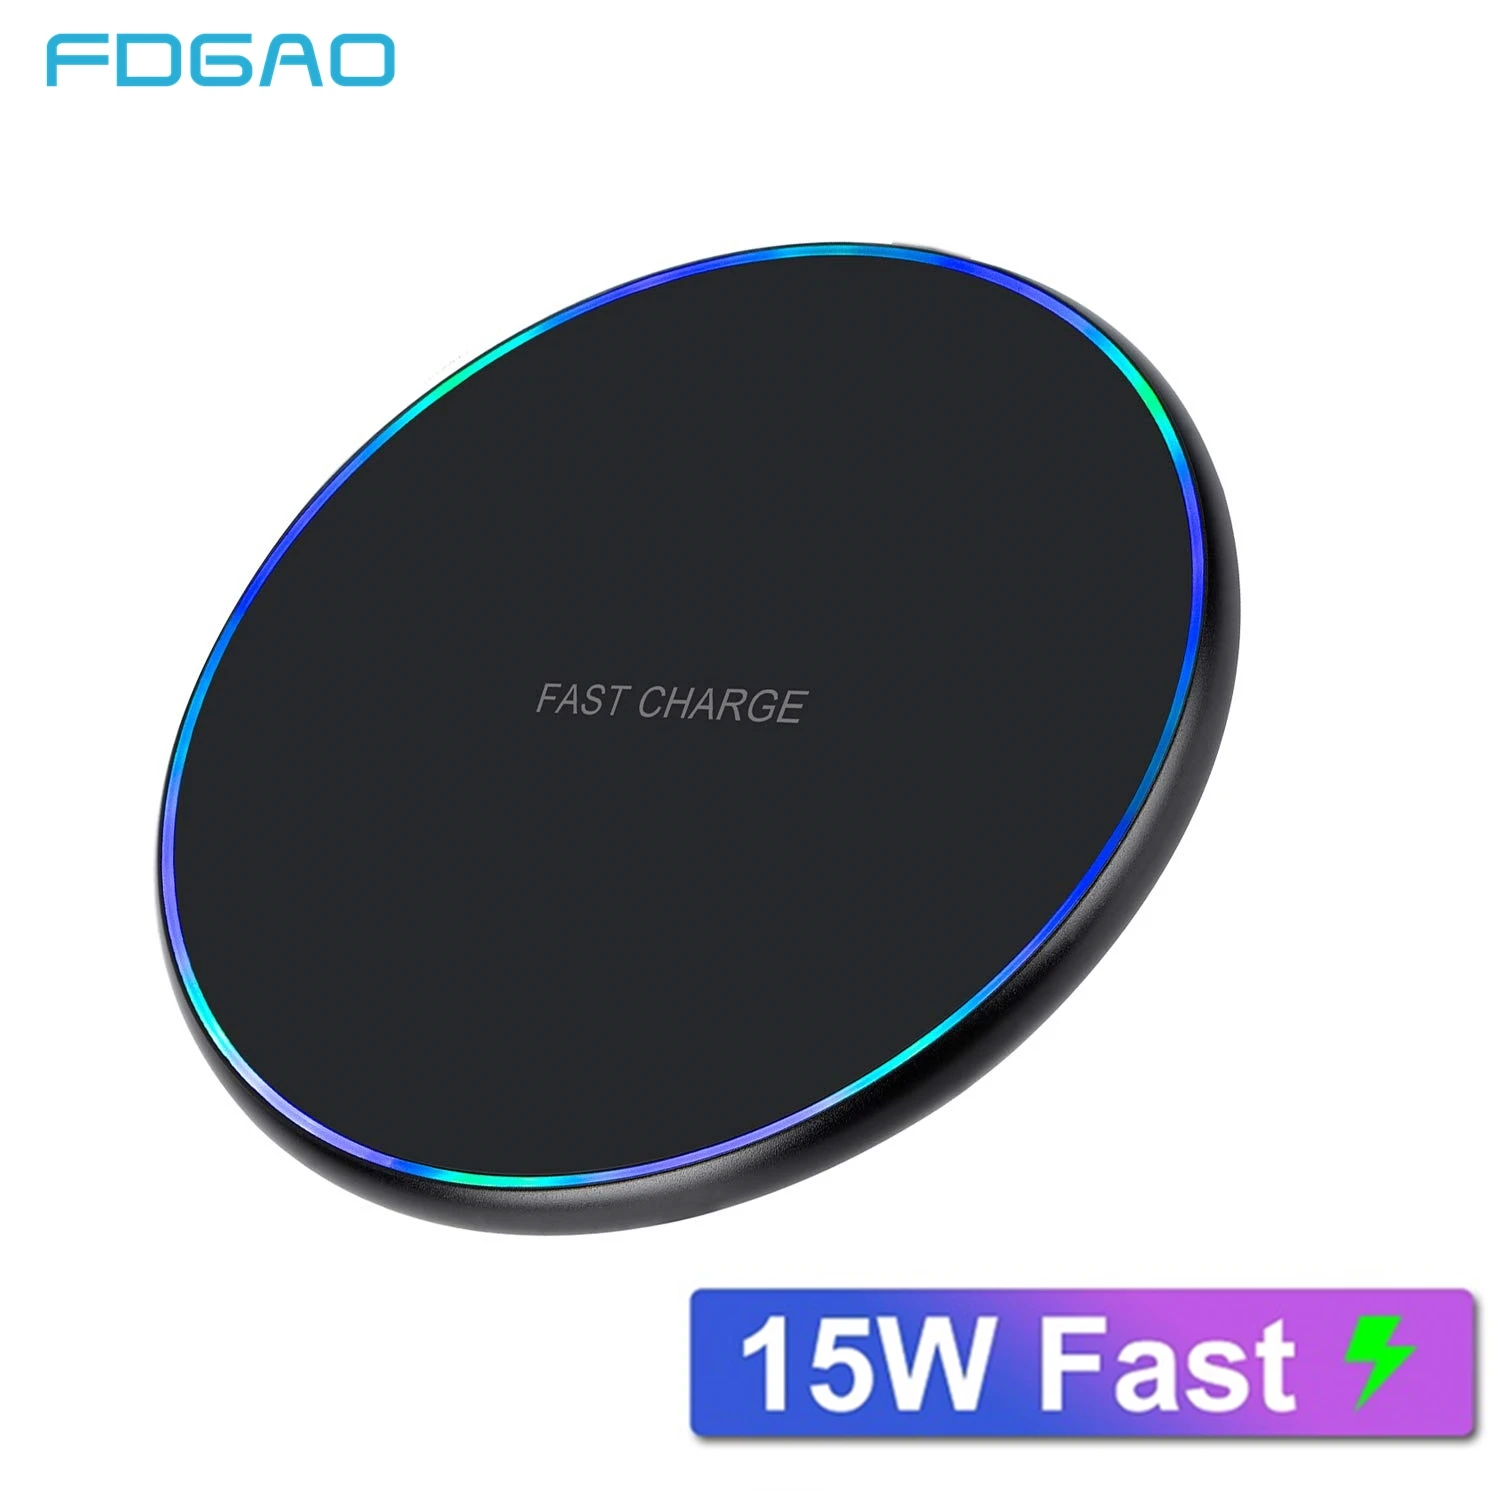 

FDGAO 15W QI Wireless Charger For Samsung S10 S9 Note 10 9 8 USB C 10W Fast Charging Pad for iPhone 11 Pro XS Max XR X 8 Airpods